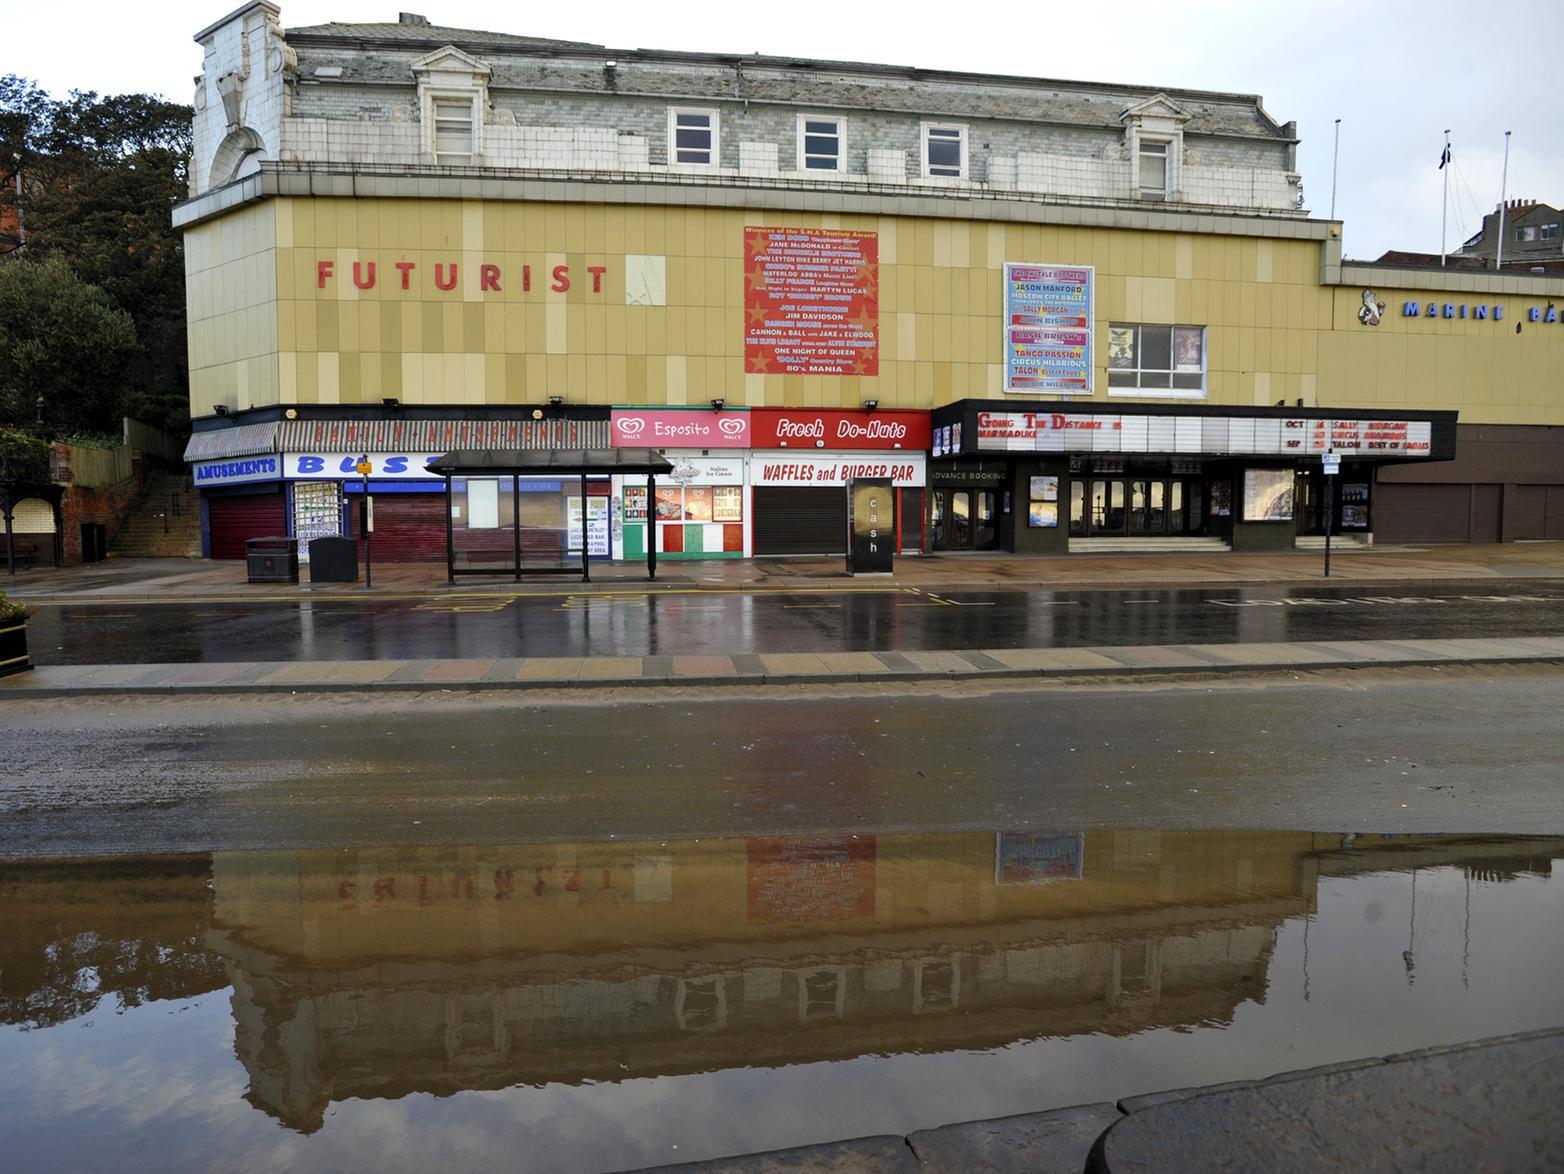 The popular theatre and cinema on Foreshore Road was demolished in 2018 despite a long fight by campaigners to save it. It hosted many famous artists including The Beatles and Rolling Stones.